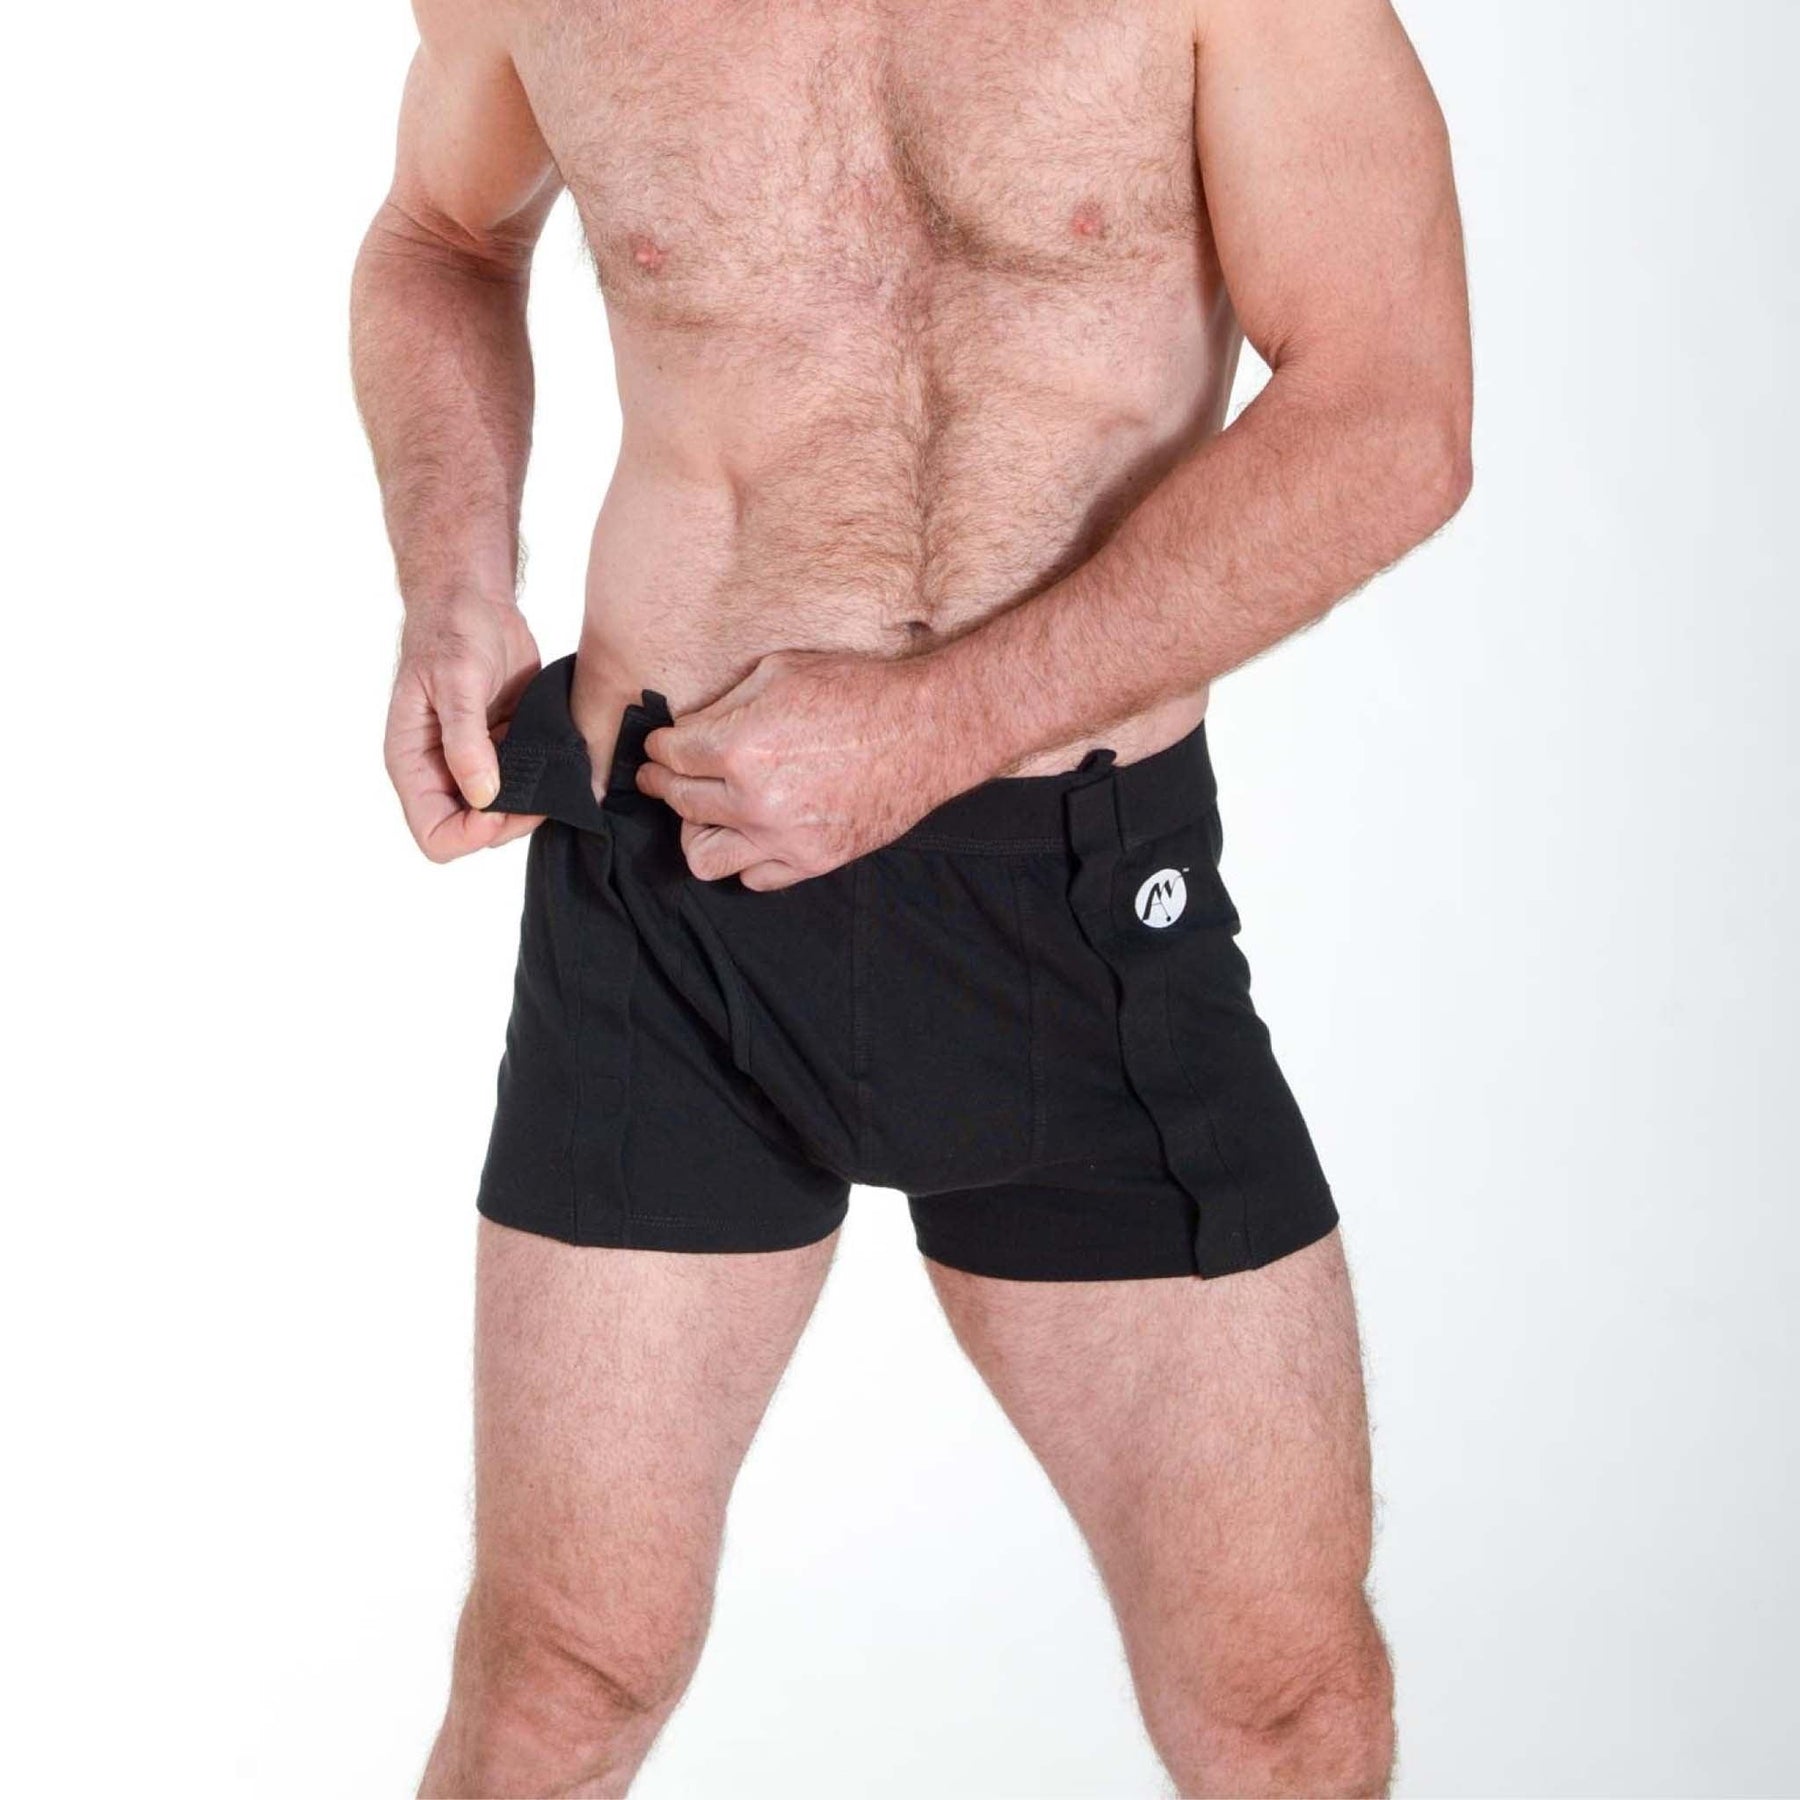 Briefs, Boxers - Underwear and Socks - Men's Clothing Adaptive Clothing for  Seniors, Disabled & Elderly Care